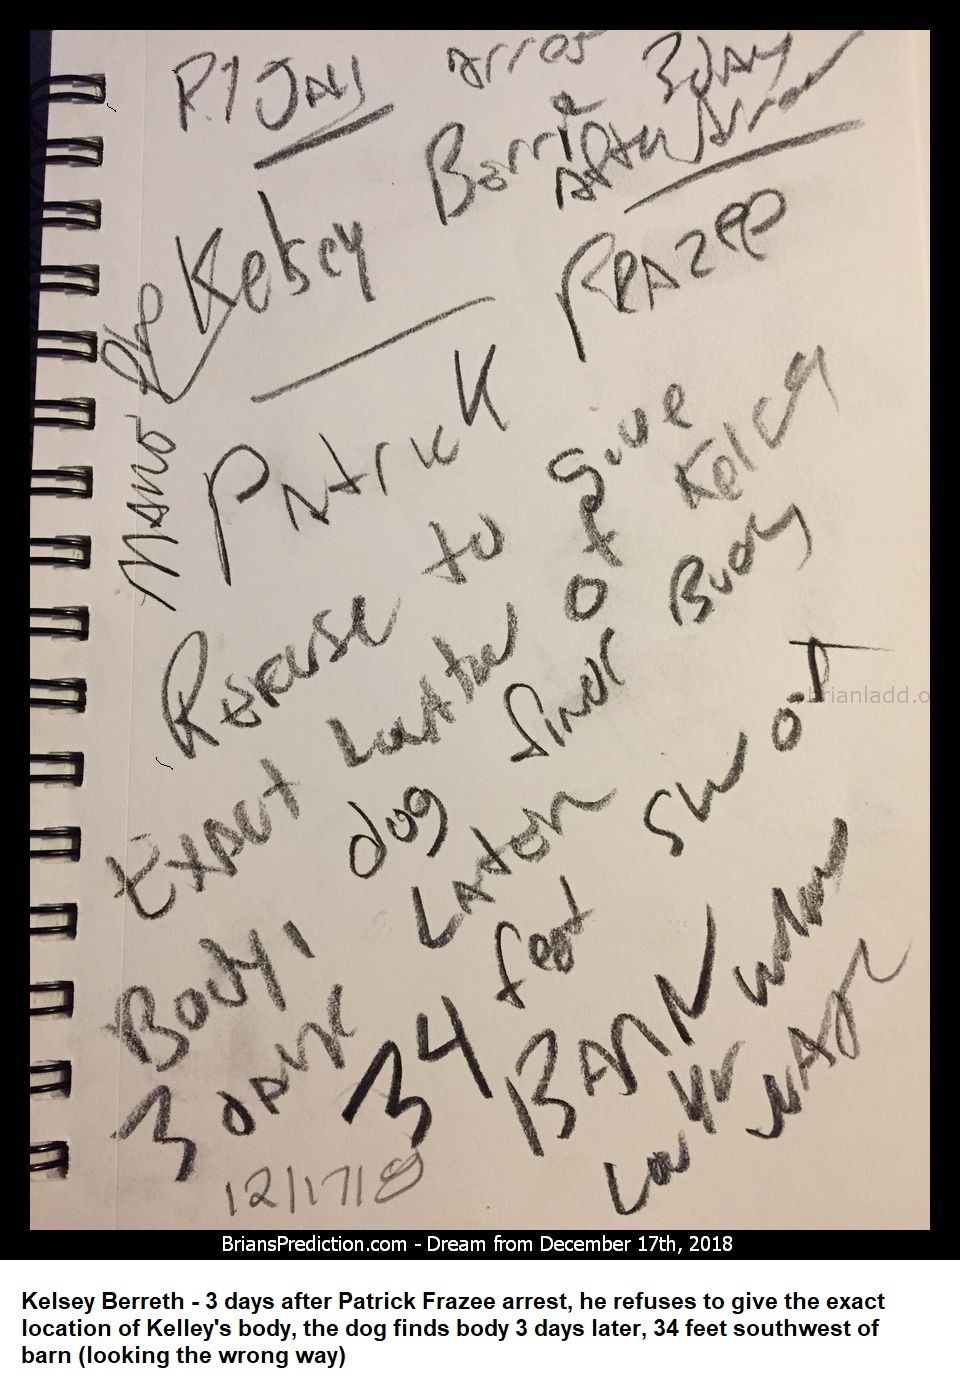 Kelsey Berreth 3 Days After Patrick Frazee Arrest 11473 17 December 2018 2 - Kelsey Berreth - 3 Days After Patrick Fraze...
Kelsey Berreth - 3 Days After Patrick Frazee Arrest, He Refuses To Give The Exact Location Of Kelley'S Body, The Dog Finds Body 3 Days Later, 34 Feet Southwest Of Barn (looking The Wrong Way)   https://briansprediction.com/Kelsey
